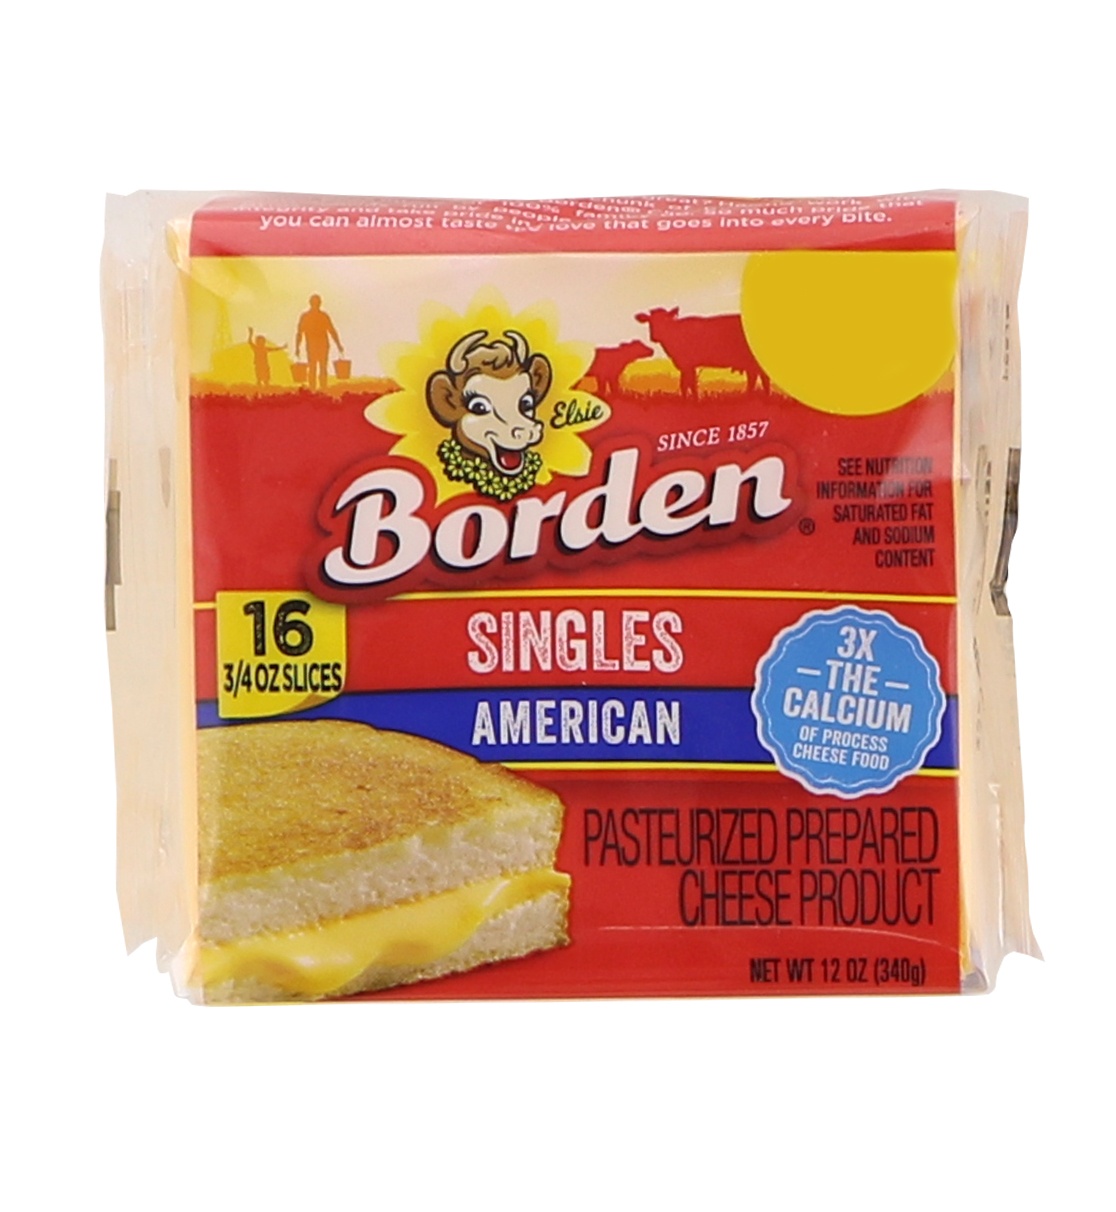 slide 1 of 1, Borden American Singles Pasteurized Prepared Cheese Product, 12 oz